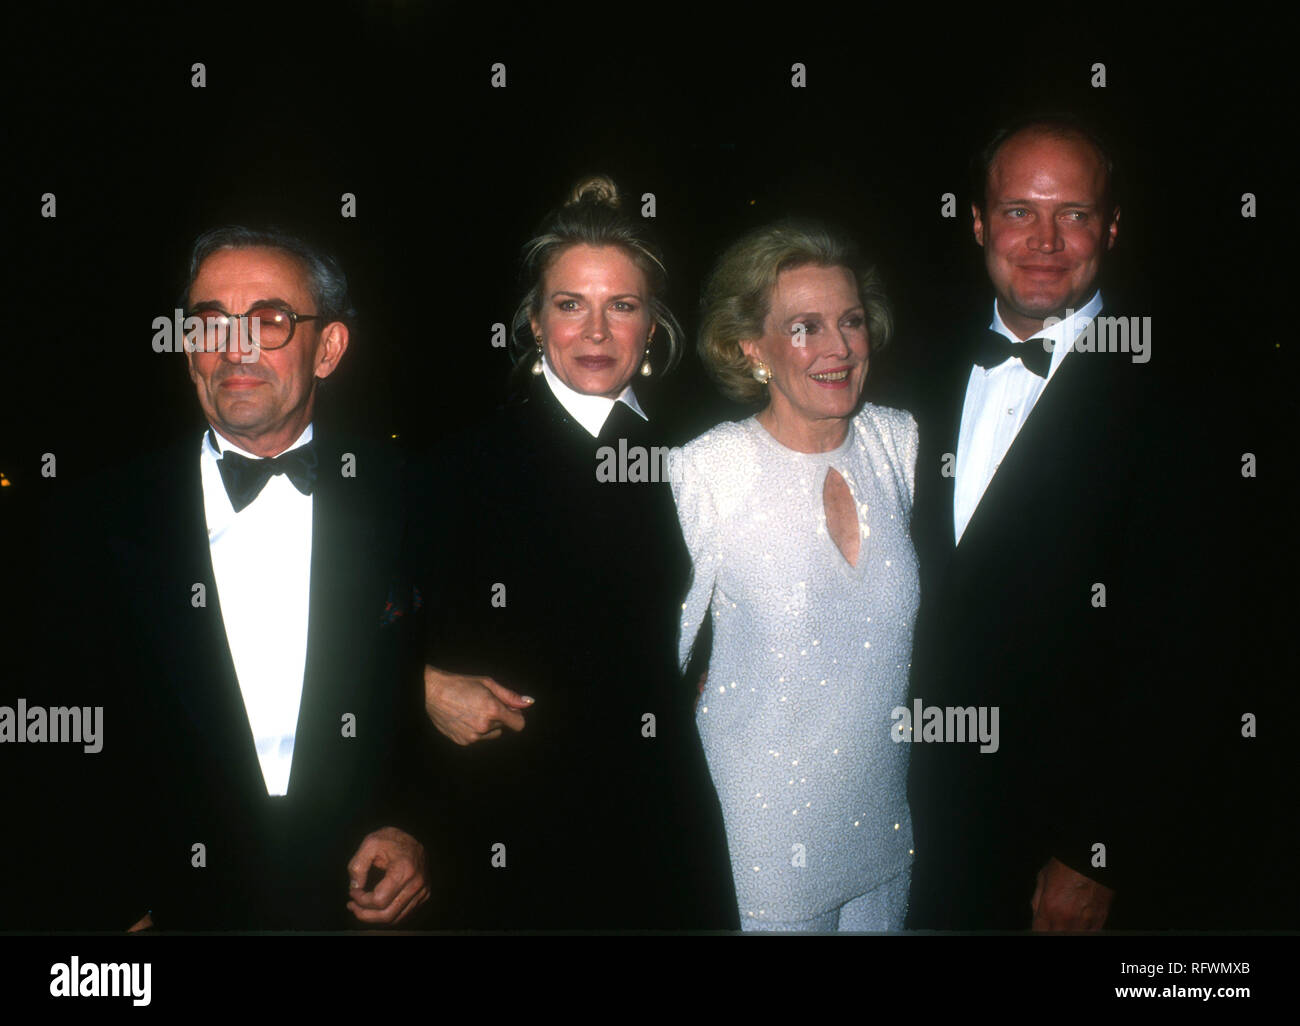 HOLLYWOOD, CA - NOVEMBER 13: Director Louis Malle, wife actress Candice Bergen, her mother actress Frances Bergen and actor Kris Bergen attend the Hollywood Entertainment Museum's Fifth Annual Legacy Awards on November 13, 1993 at the Hollywood Palladium in Hollywood, California. Photo by Barry King/Alamy Stock Photo Stock Photo